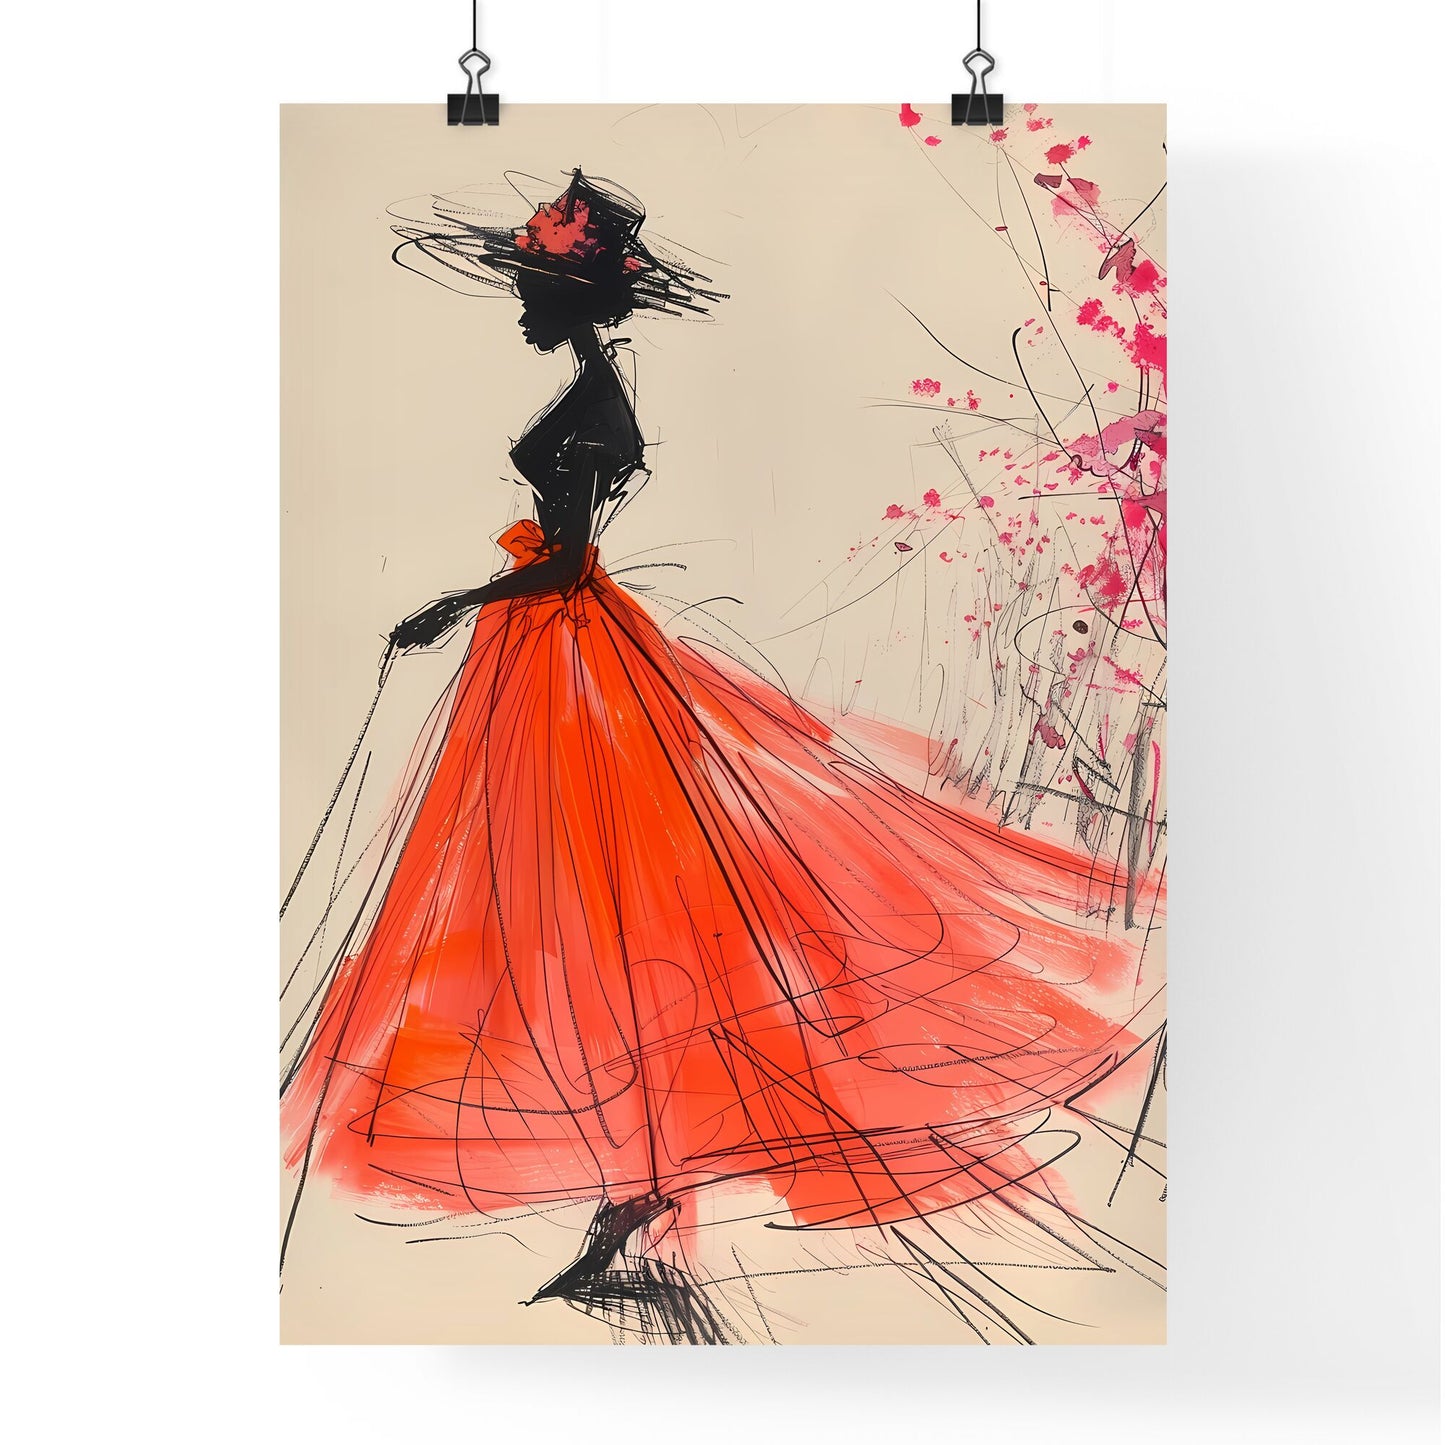 Vibrant Fashion Art: Artistic Woman Sketch in Flowing Red Dress Default Title